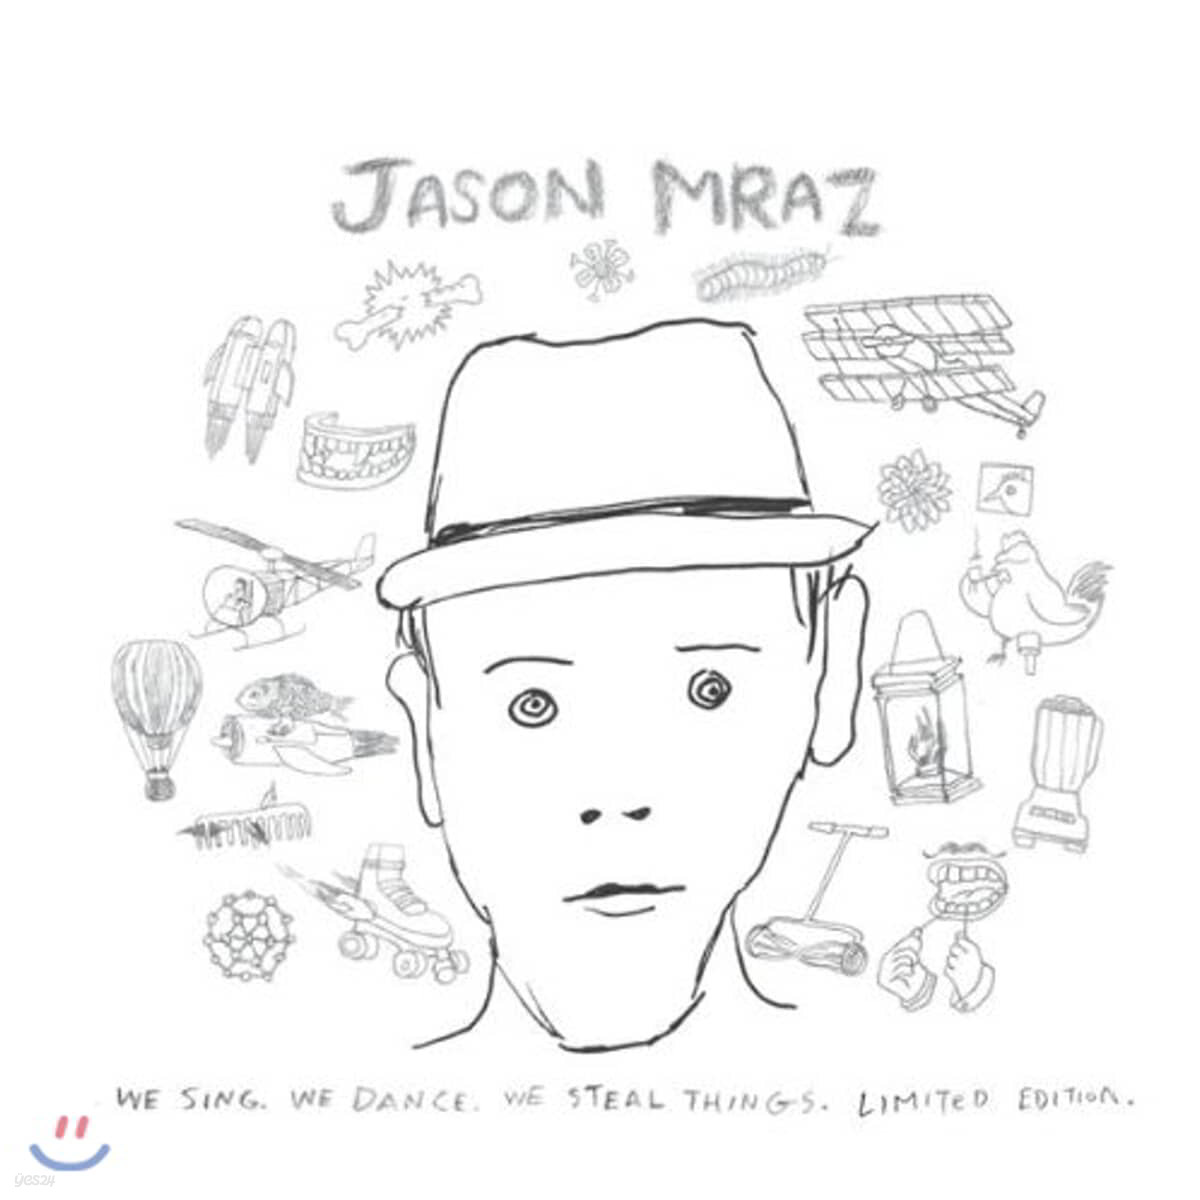 Jason Mraz - We Sing. We Dance. We Steal Things 제이슨 므라즈 3집 (Expanded Edition)